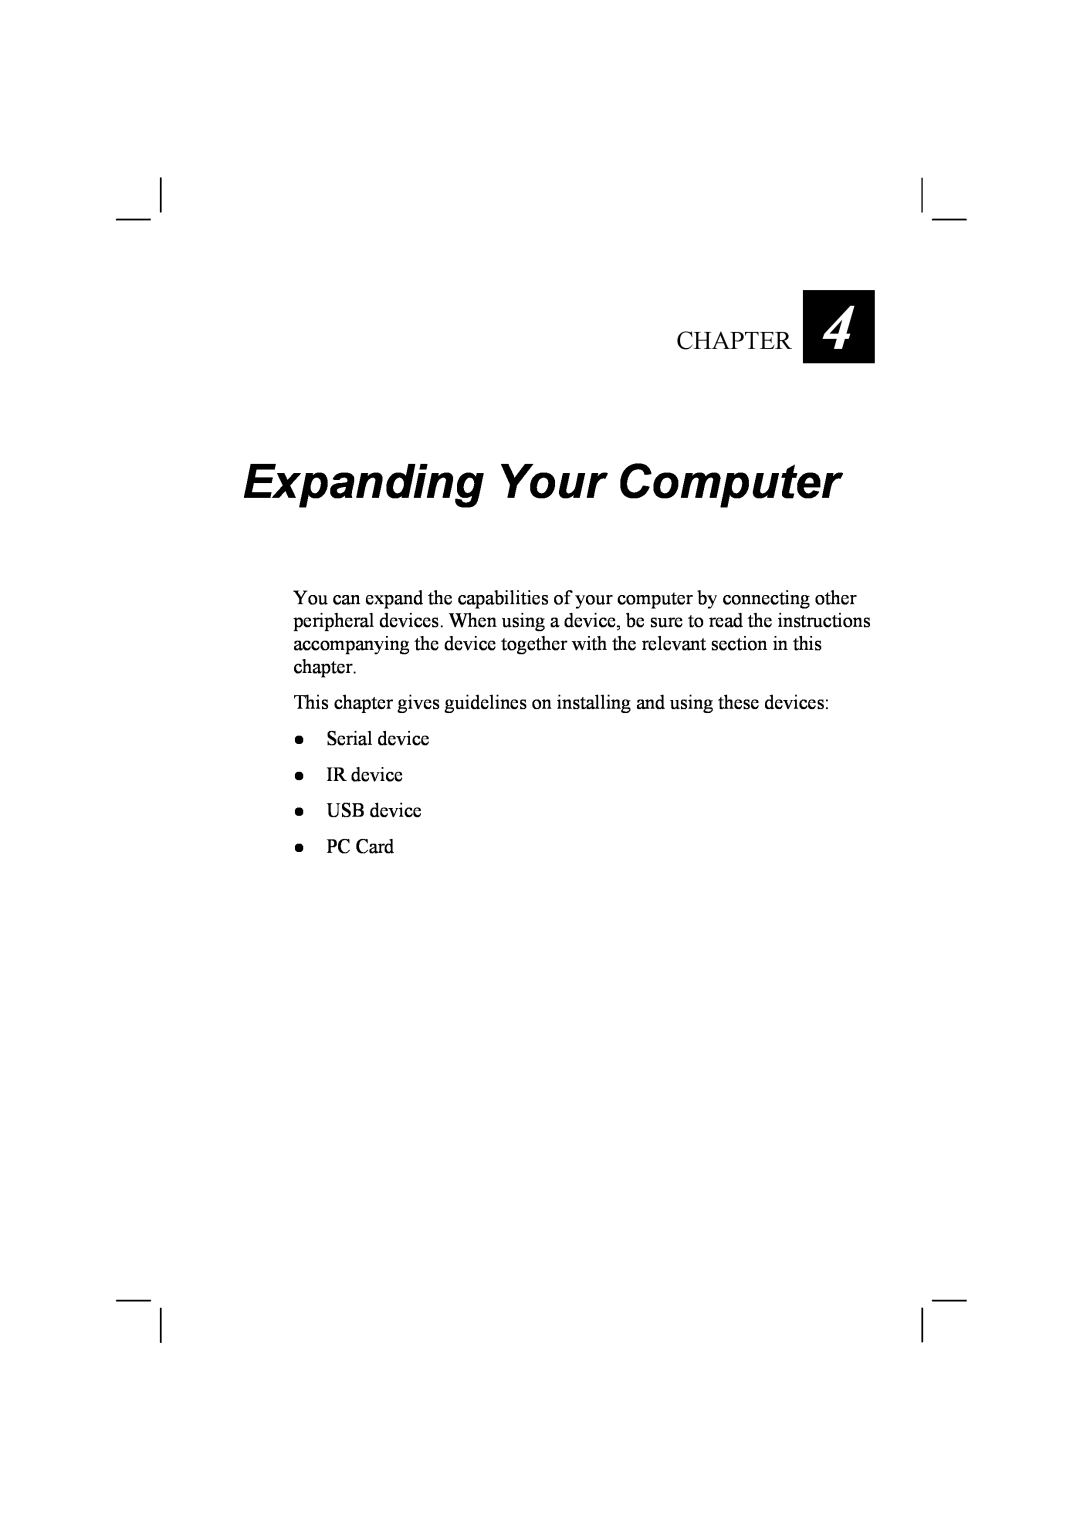 TAG 10 manual Expanding Your Computer, Chapter, This chapter gives guidelines on installing and using these devices 